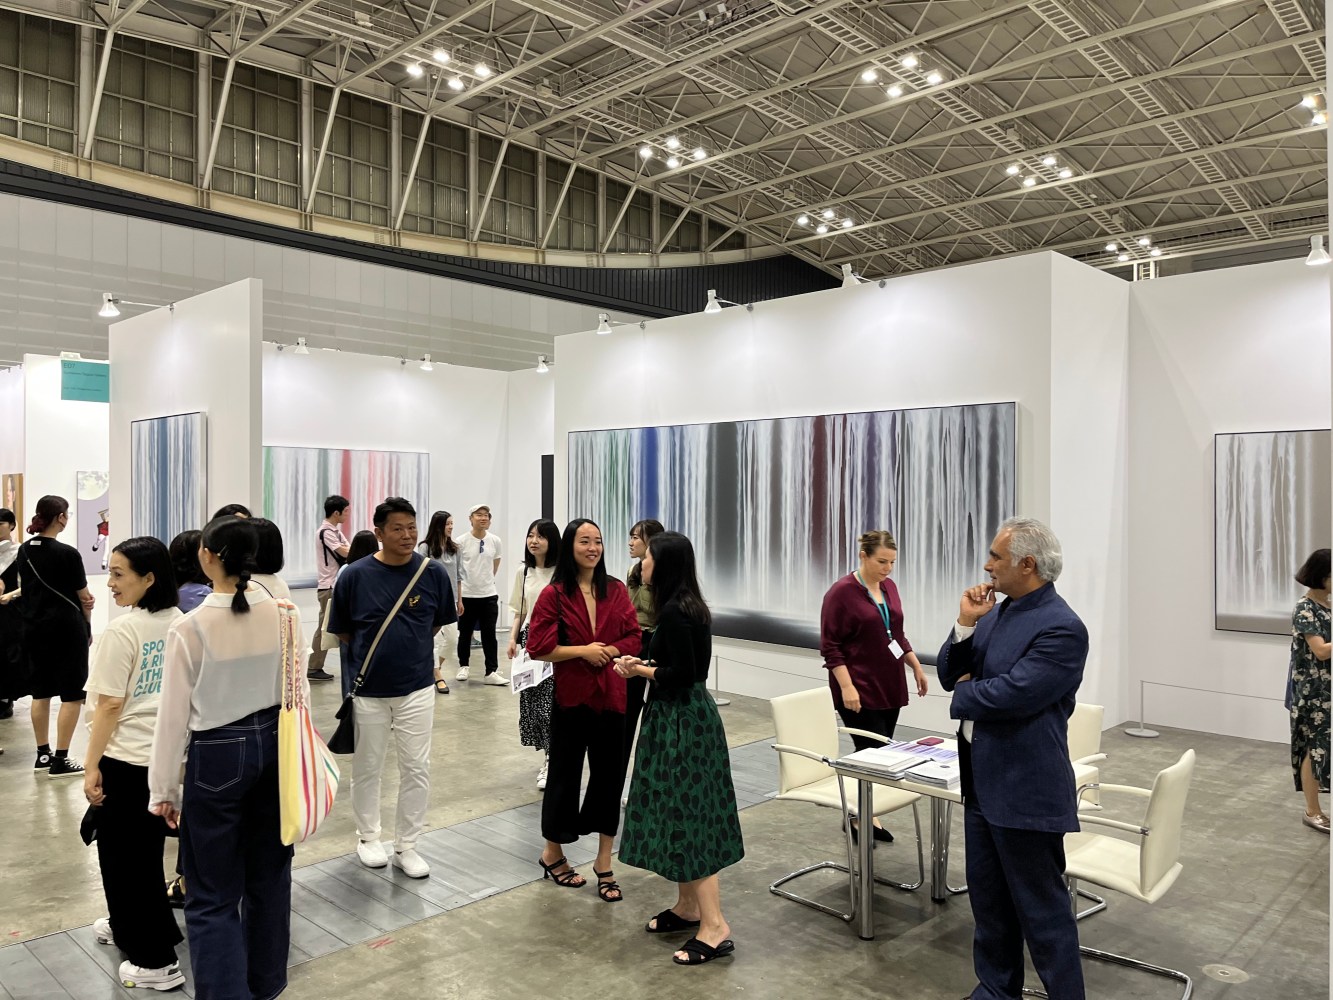 Exhibited works for Sundaram Tagore Gallery Booth at Tokyo Gendai; described as the first international contemporary art fair in Tokyo bay in 30 years, It was such a pleasure to have Ambassador Emanuel and Ms. Amy Rule join for the opening day.